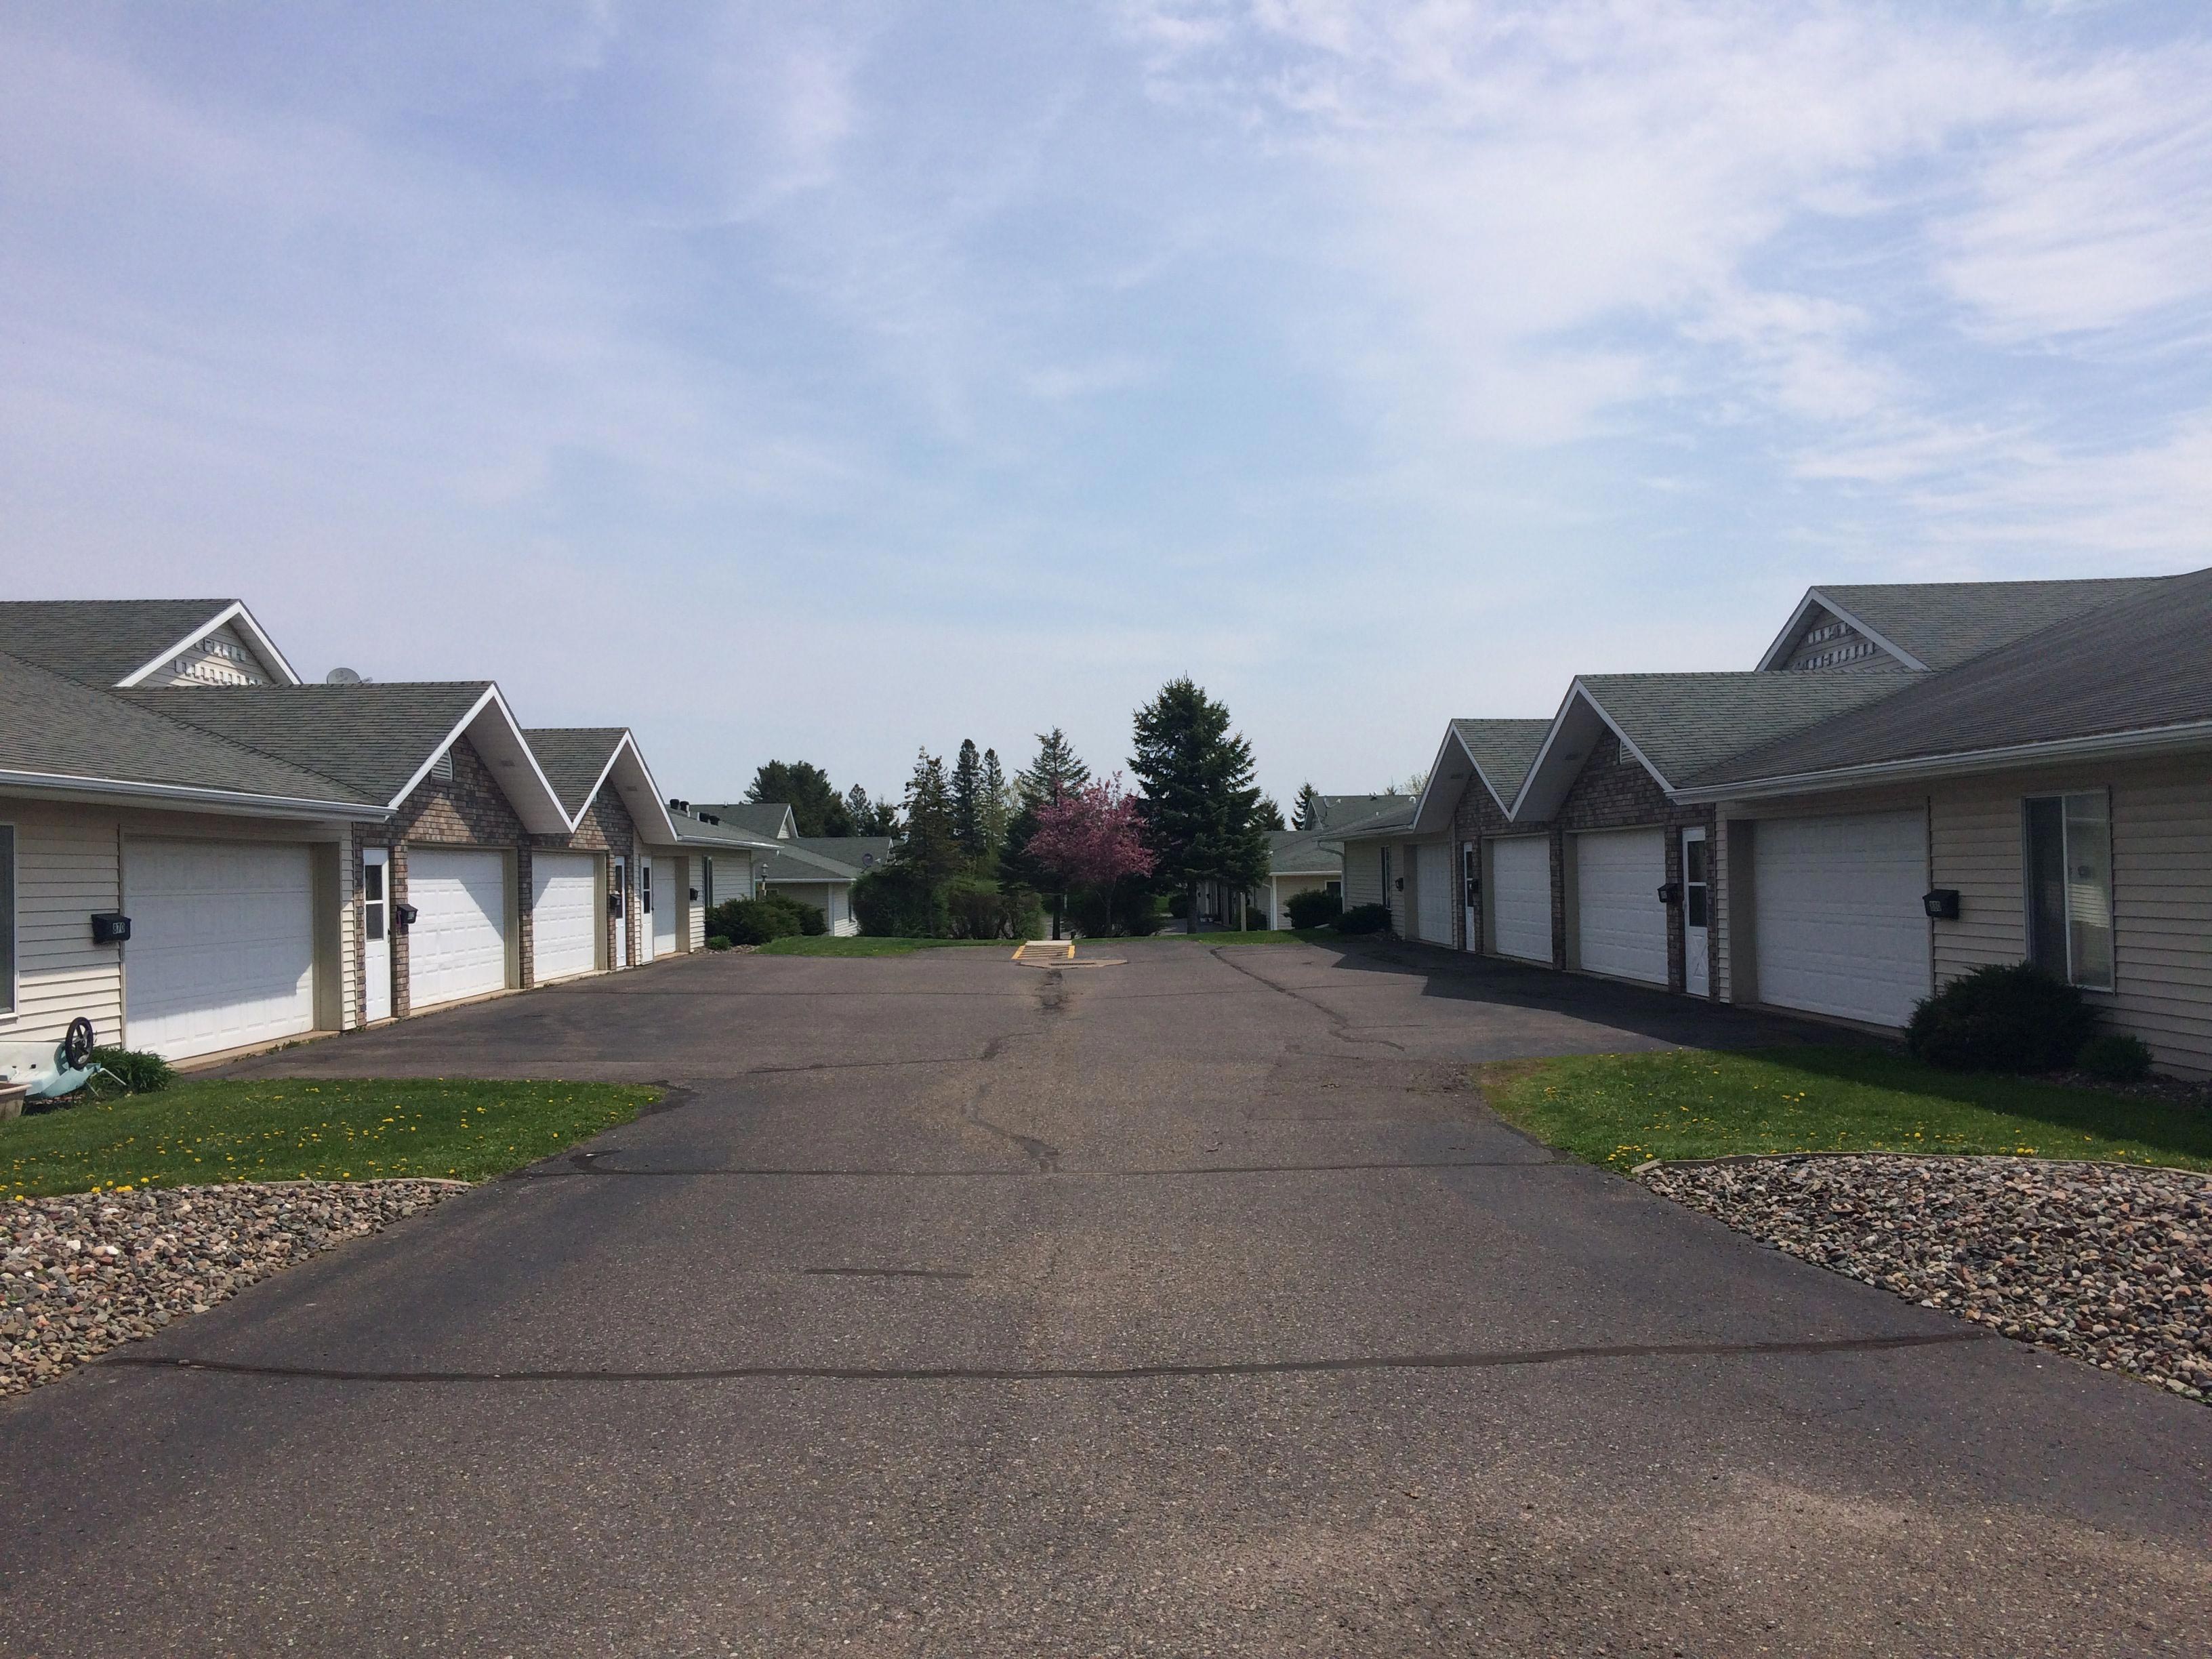 paved-driveway-parking-lot-infront-of-garages